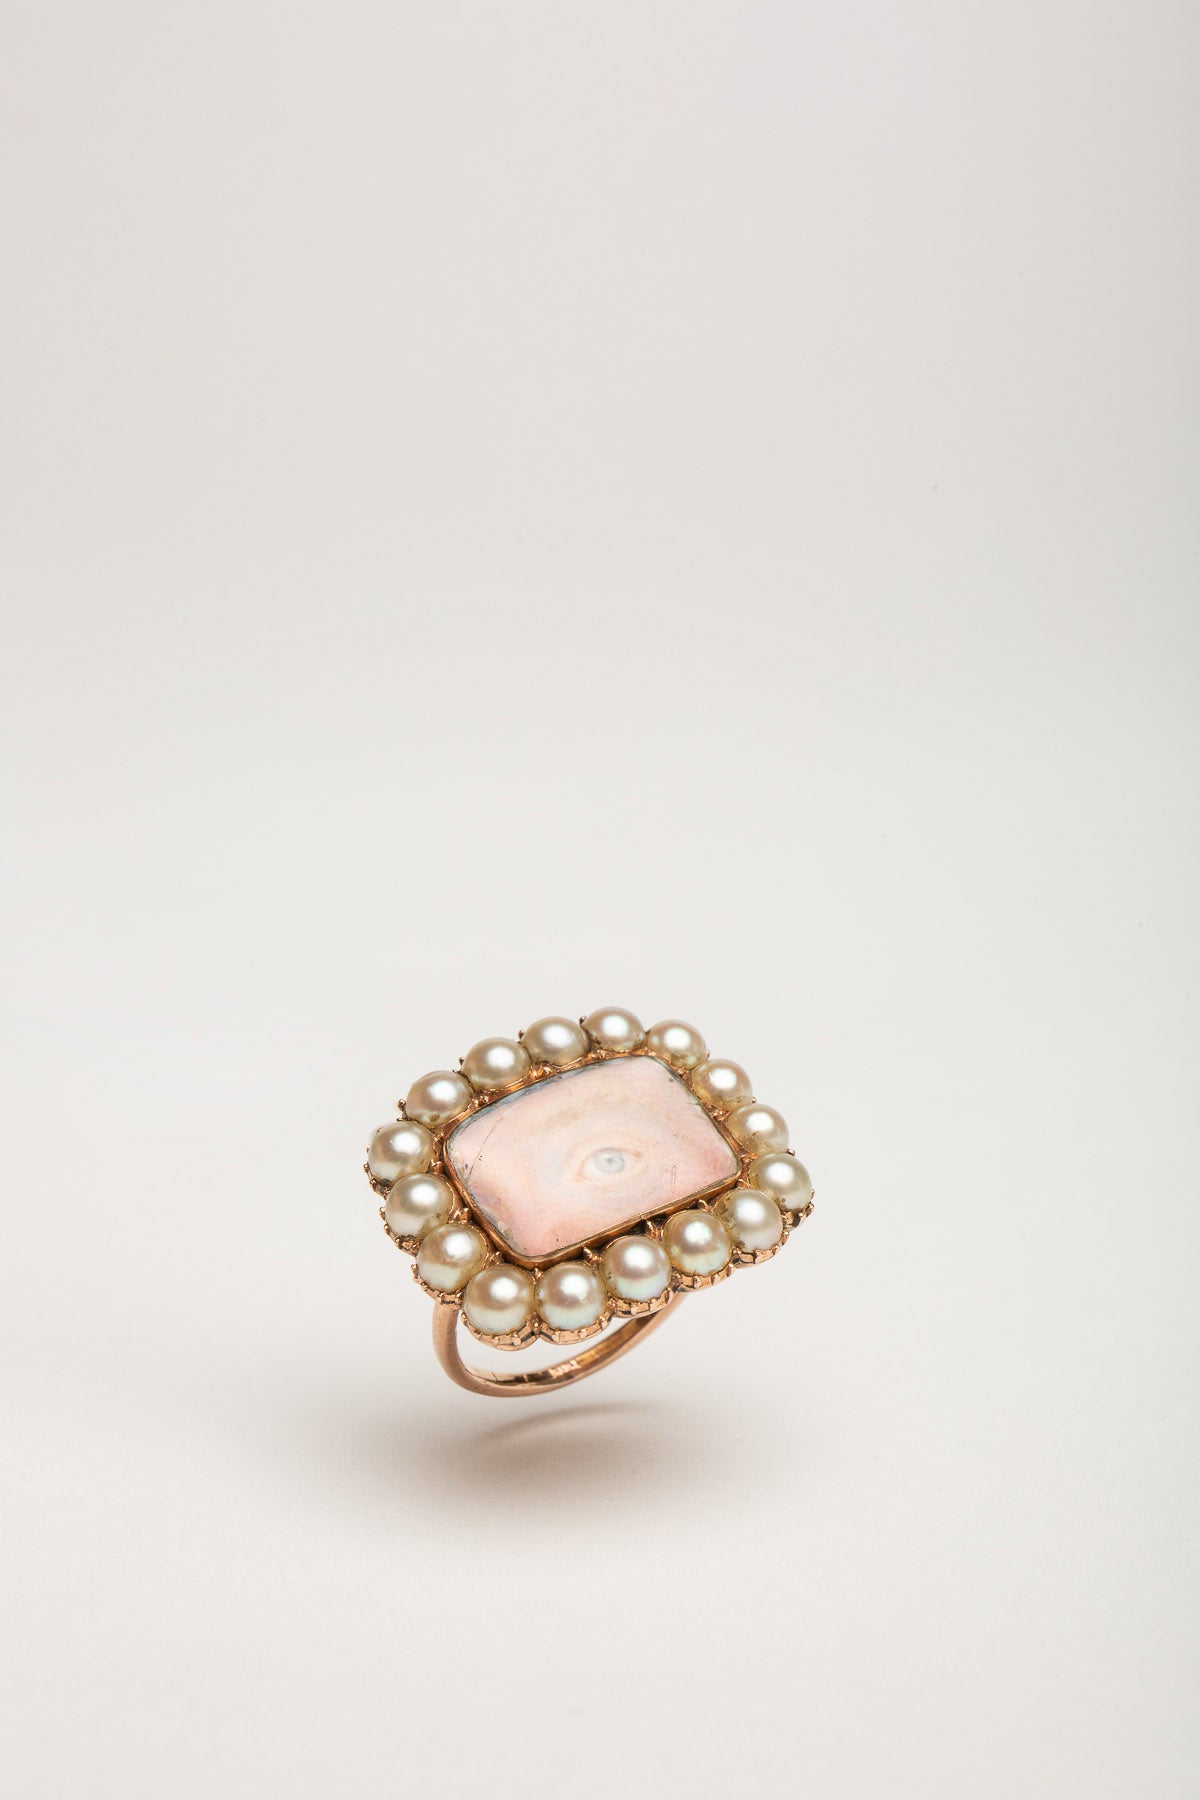 MAXFIELD PRIVATE COLLECTION | 1800'S PAINTED SQUARE EYE PEARL RING